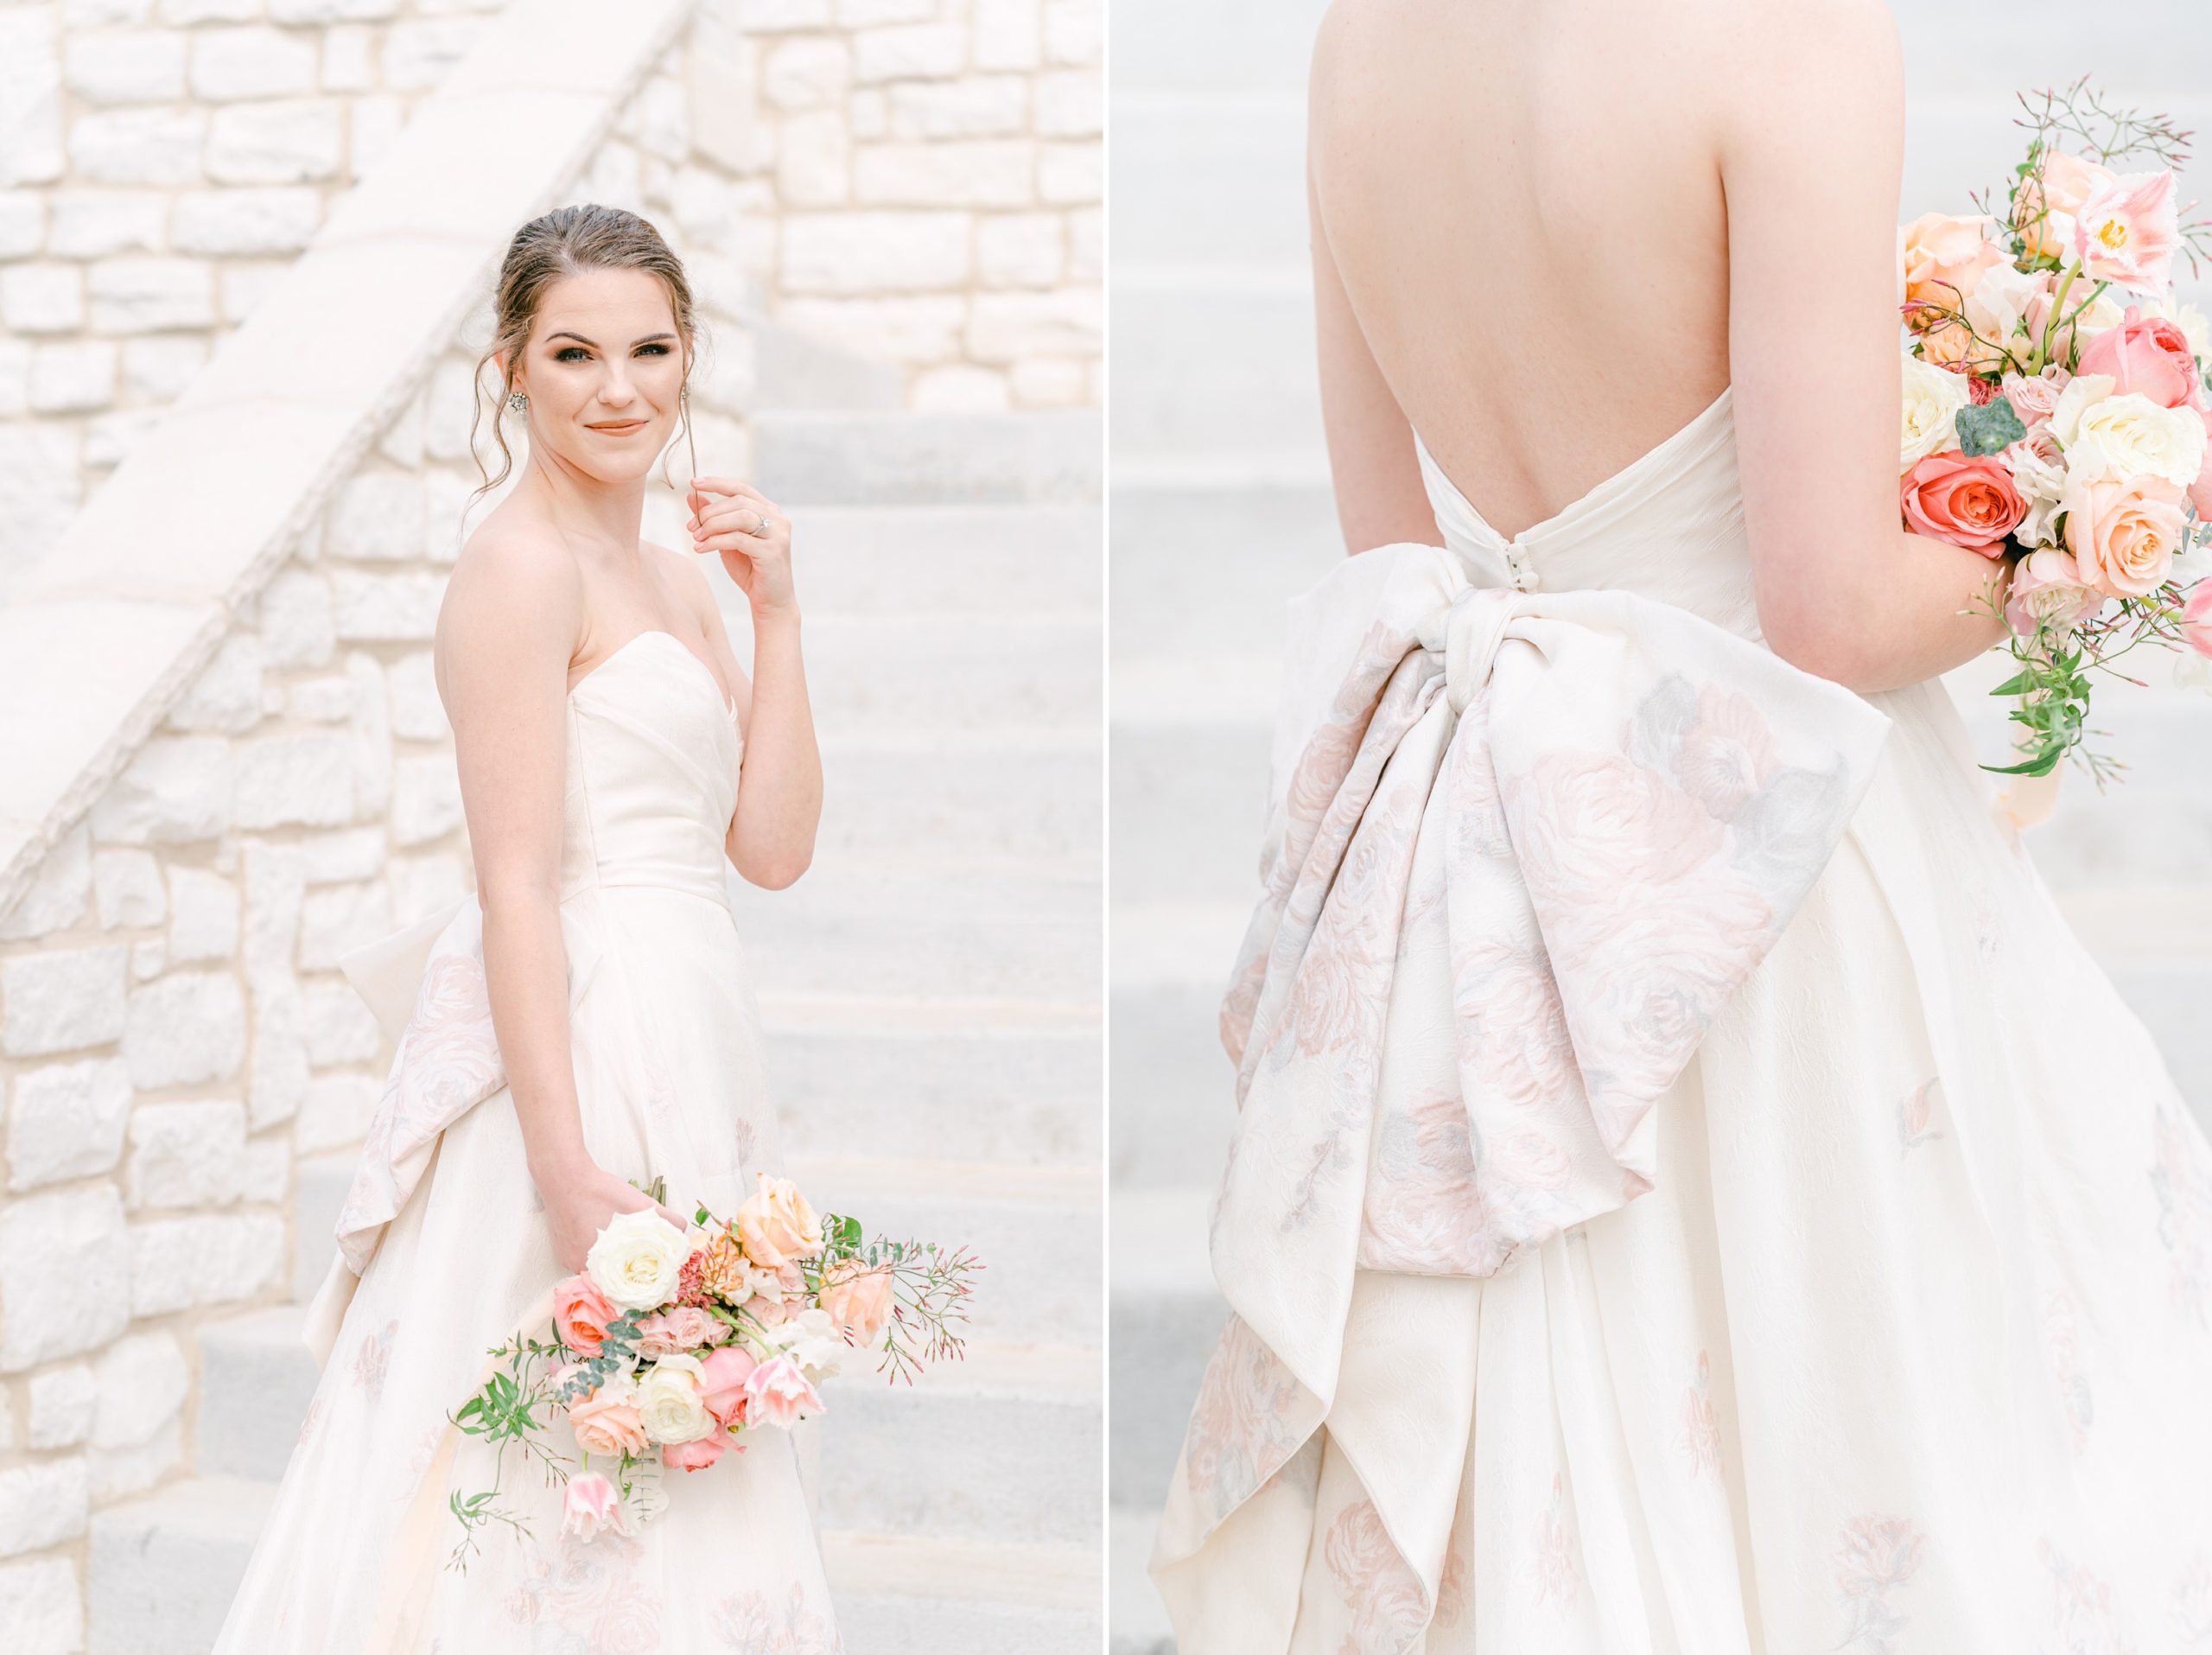 Spring-wedding-inspiration-bride-in-dress-with-bow